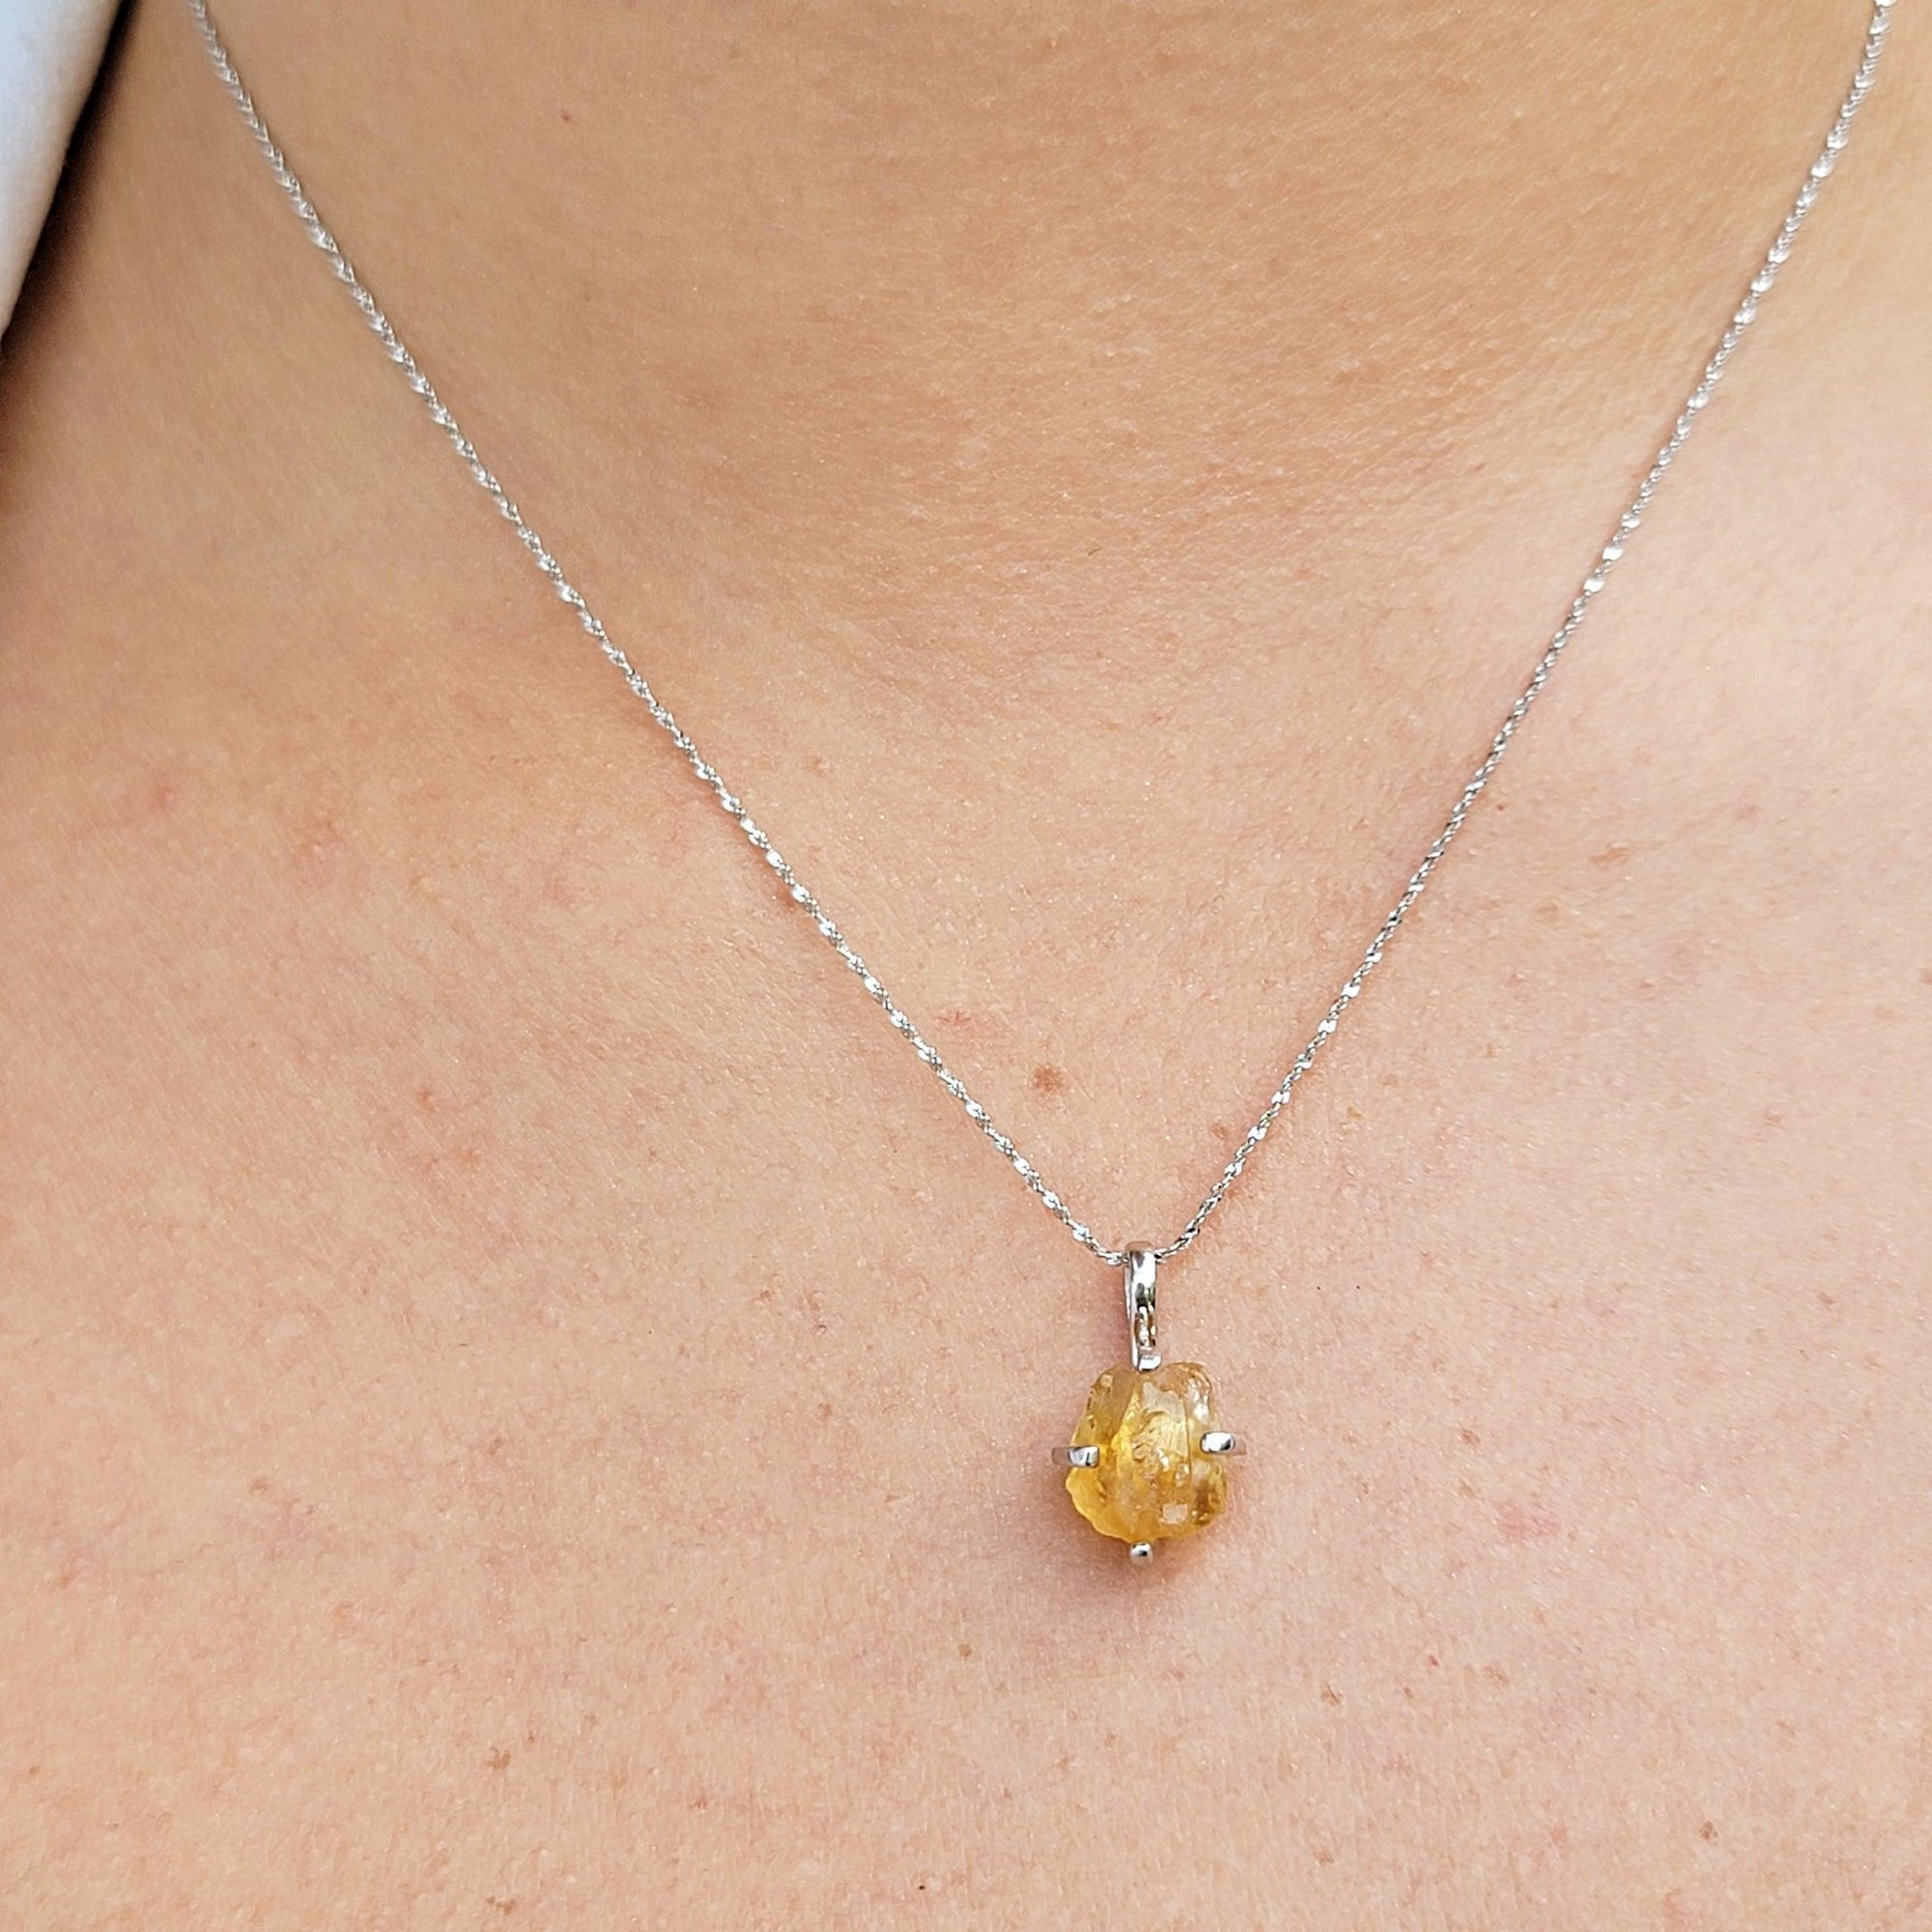 Raw Citrine Necklace and Stud Earrings Set - Uniquelan Jewelry